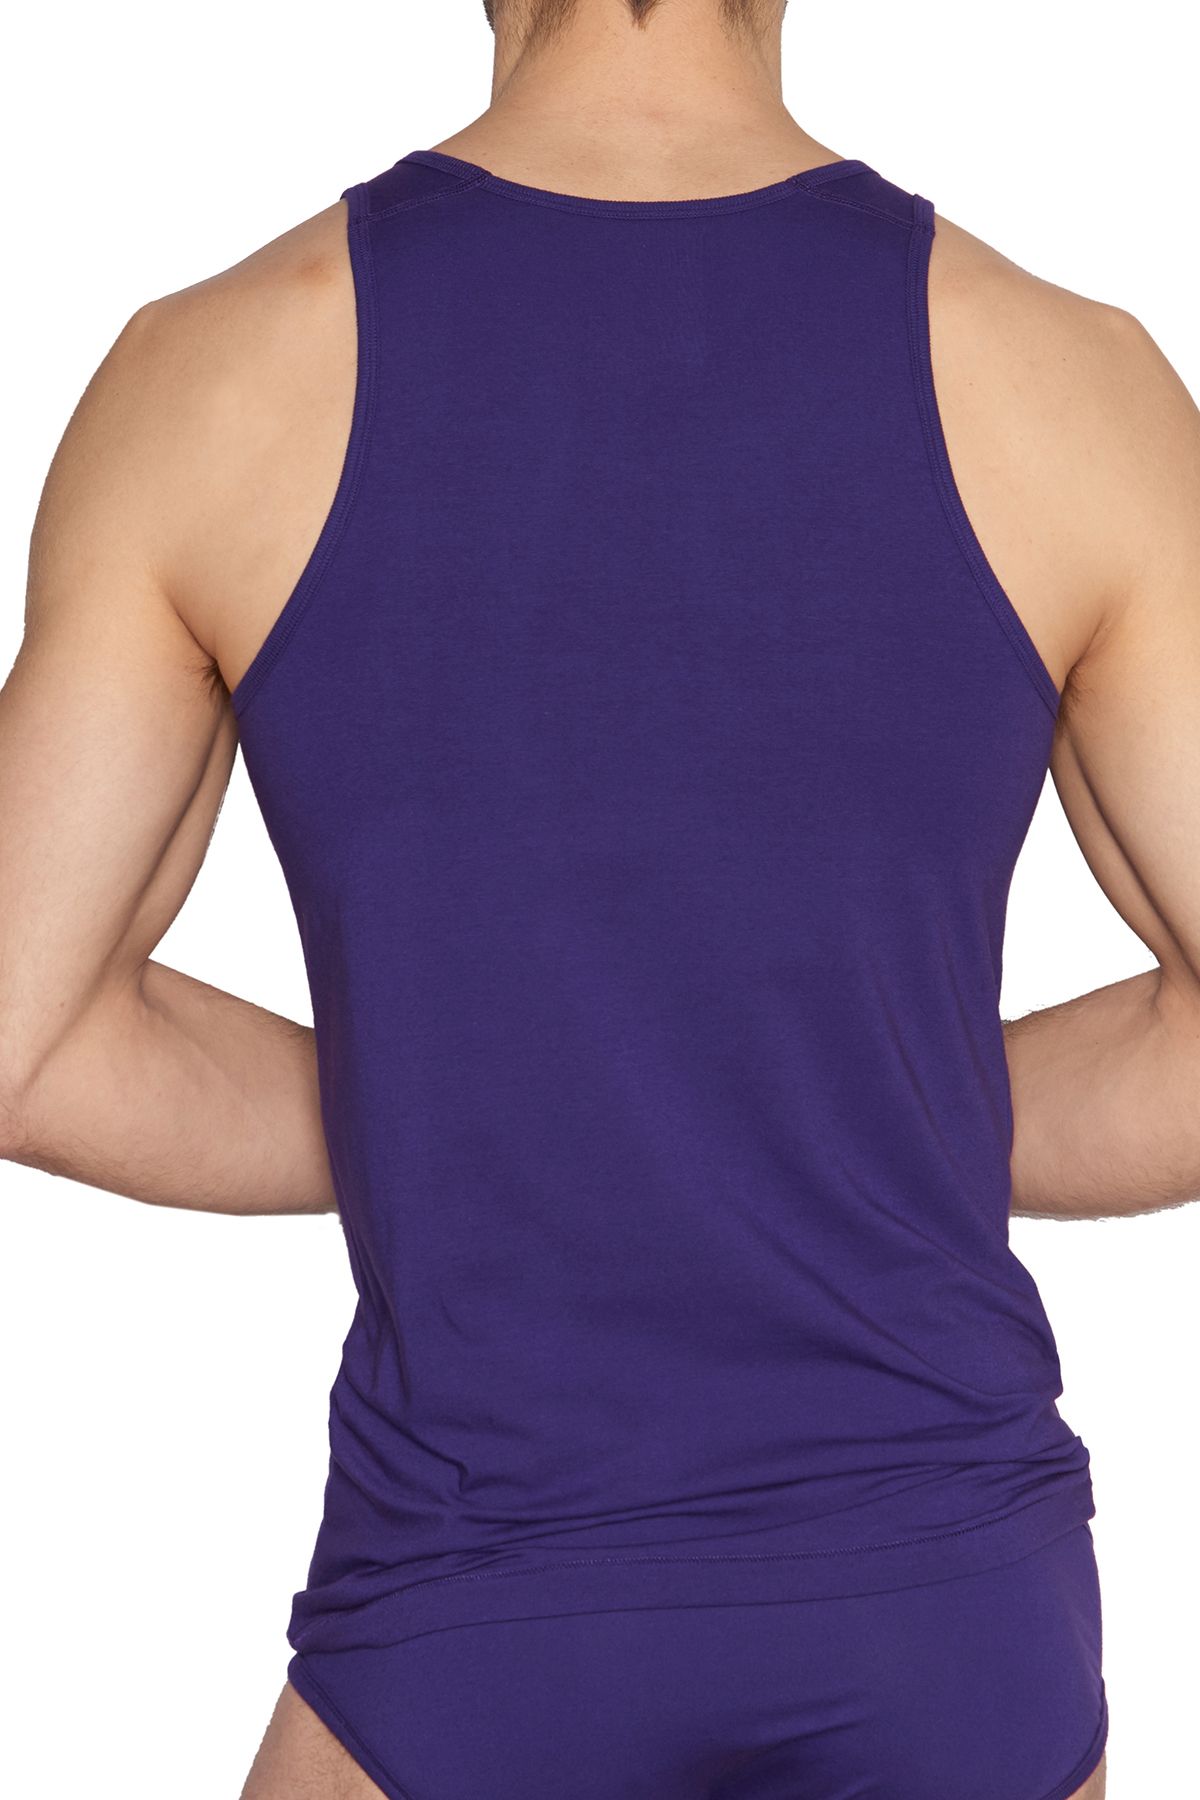 C-IN2 Tanager-Teal/Purple-Label Stretch Tank 2-Pack